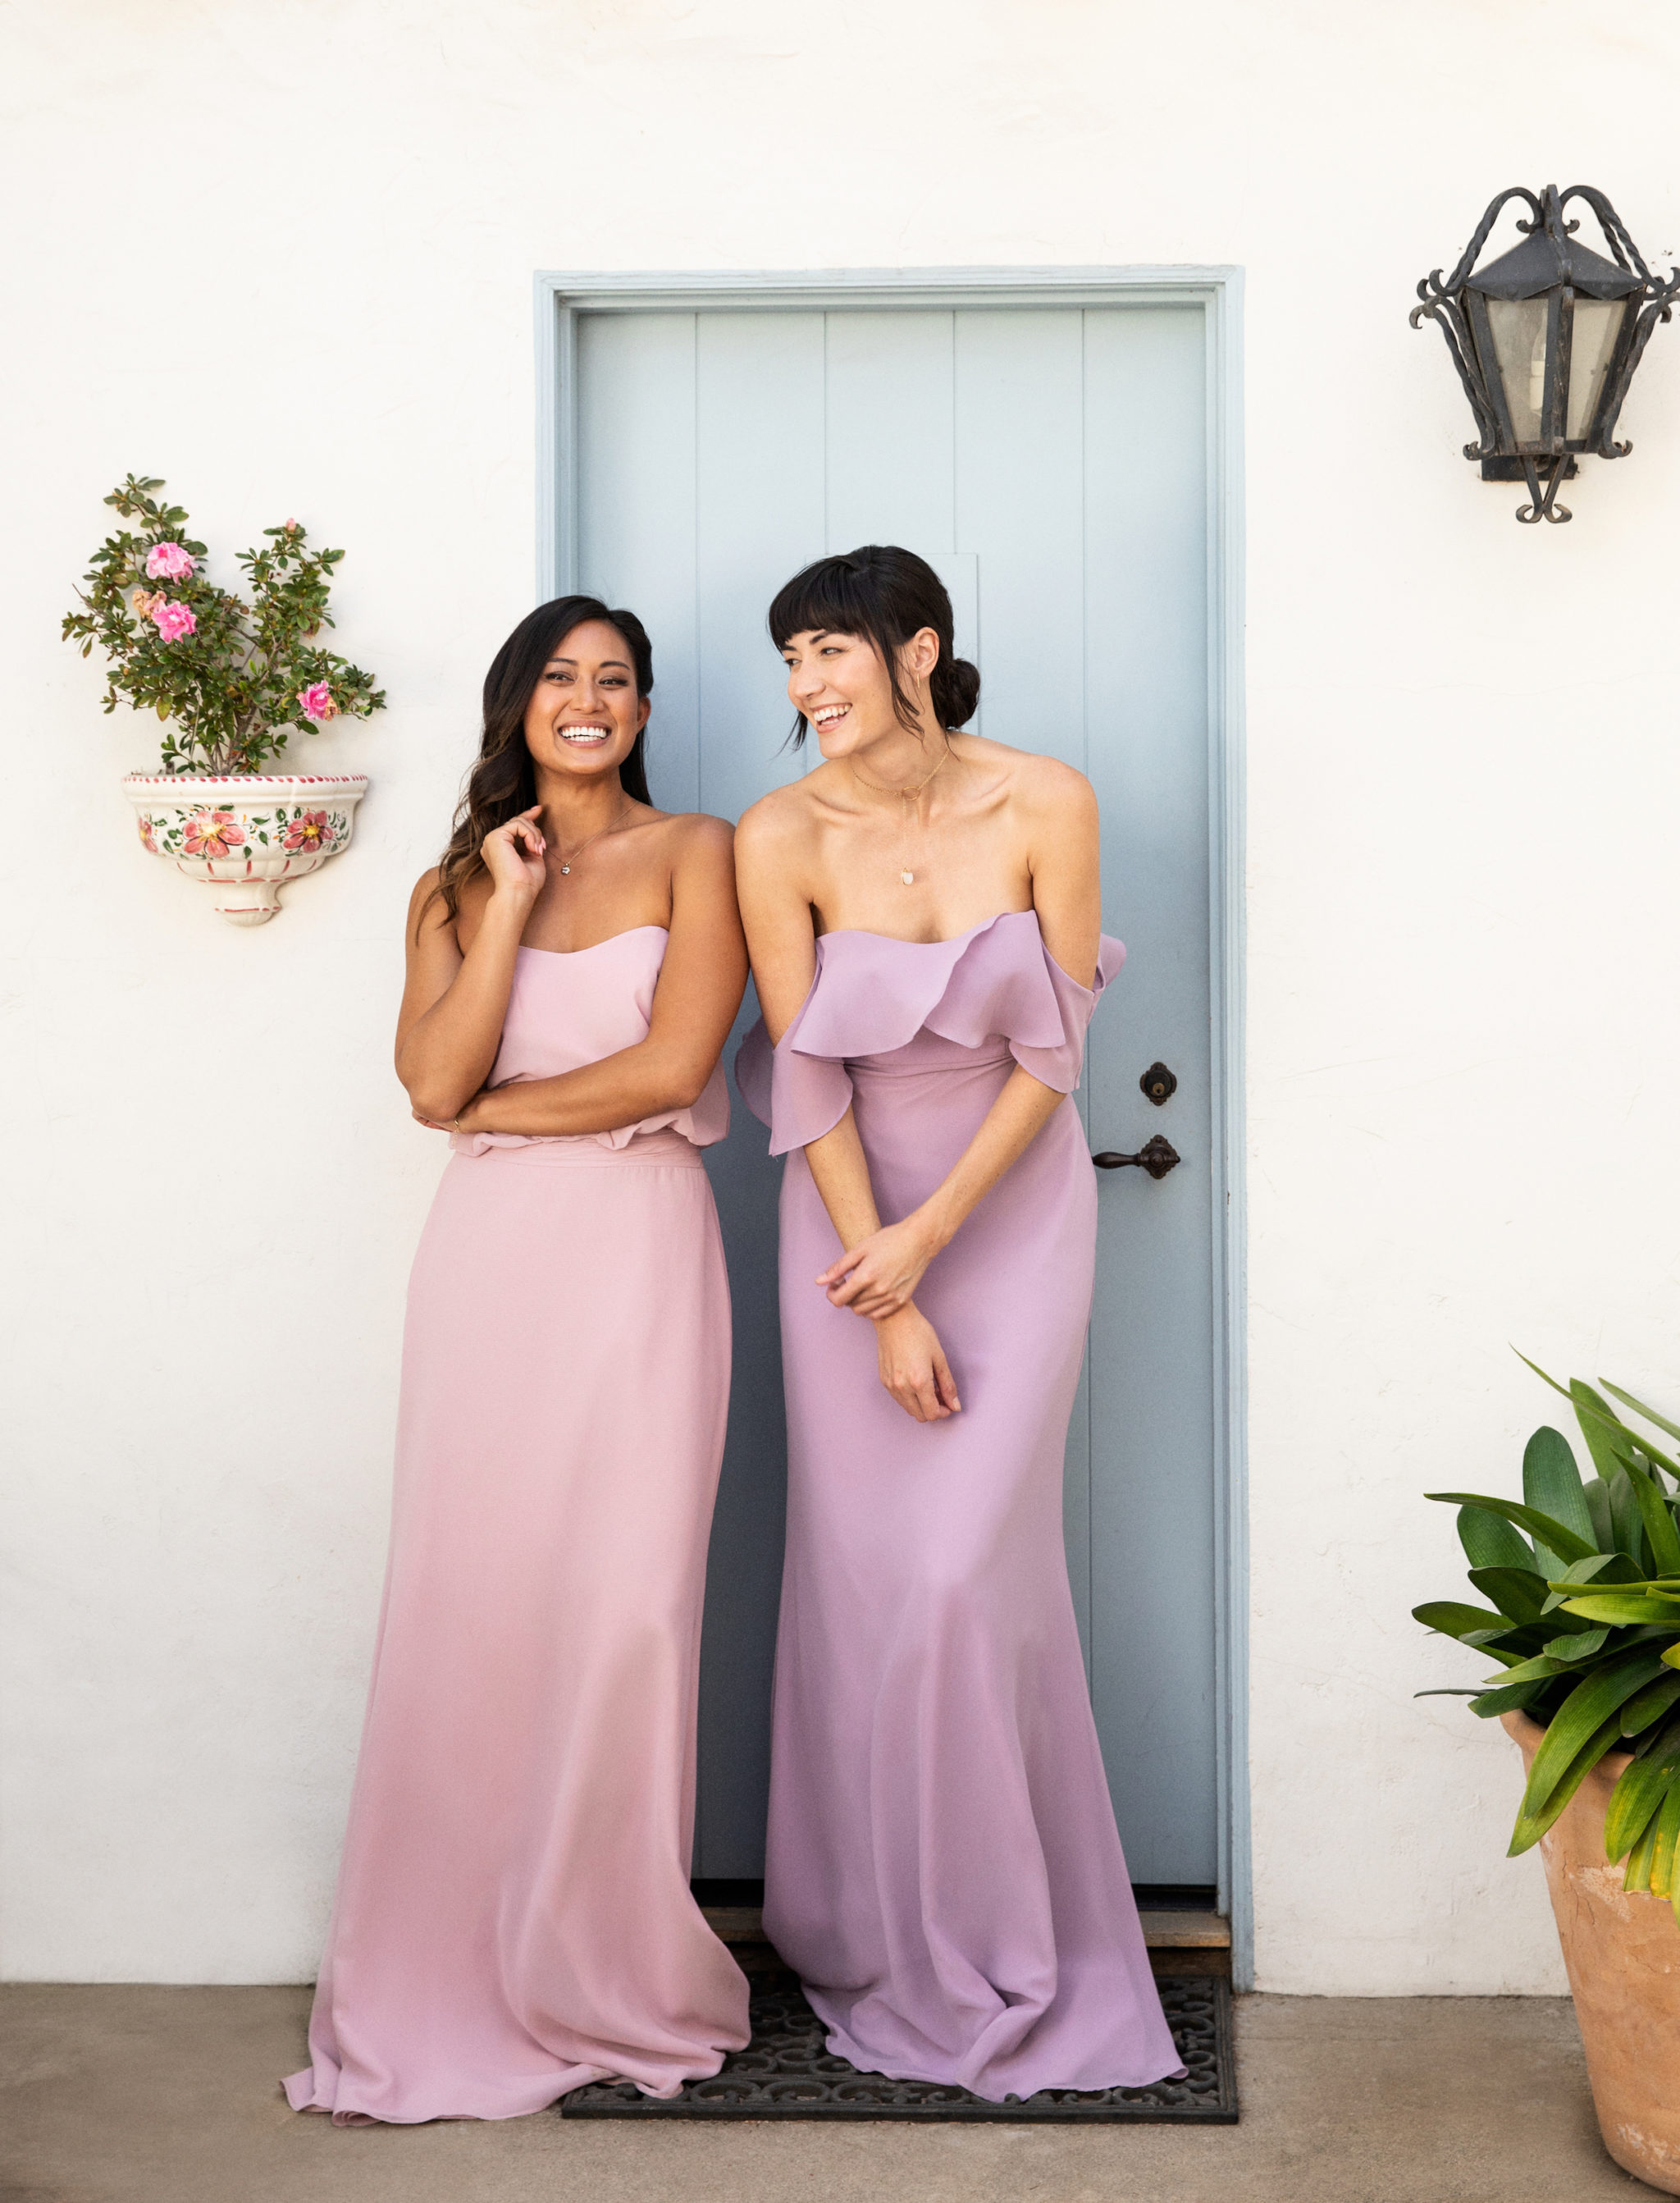 Two women in Brideside bridesmaid dresses laugh in front of a light blue door.